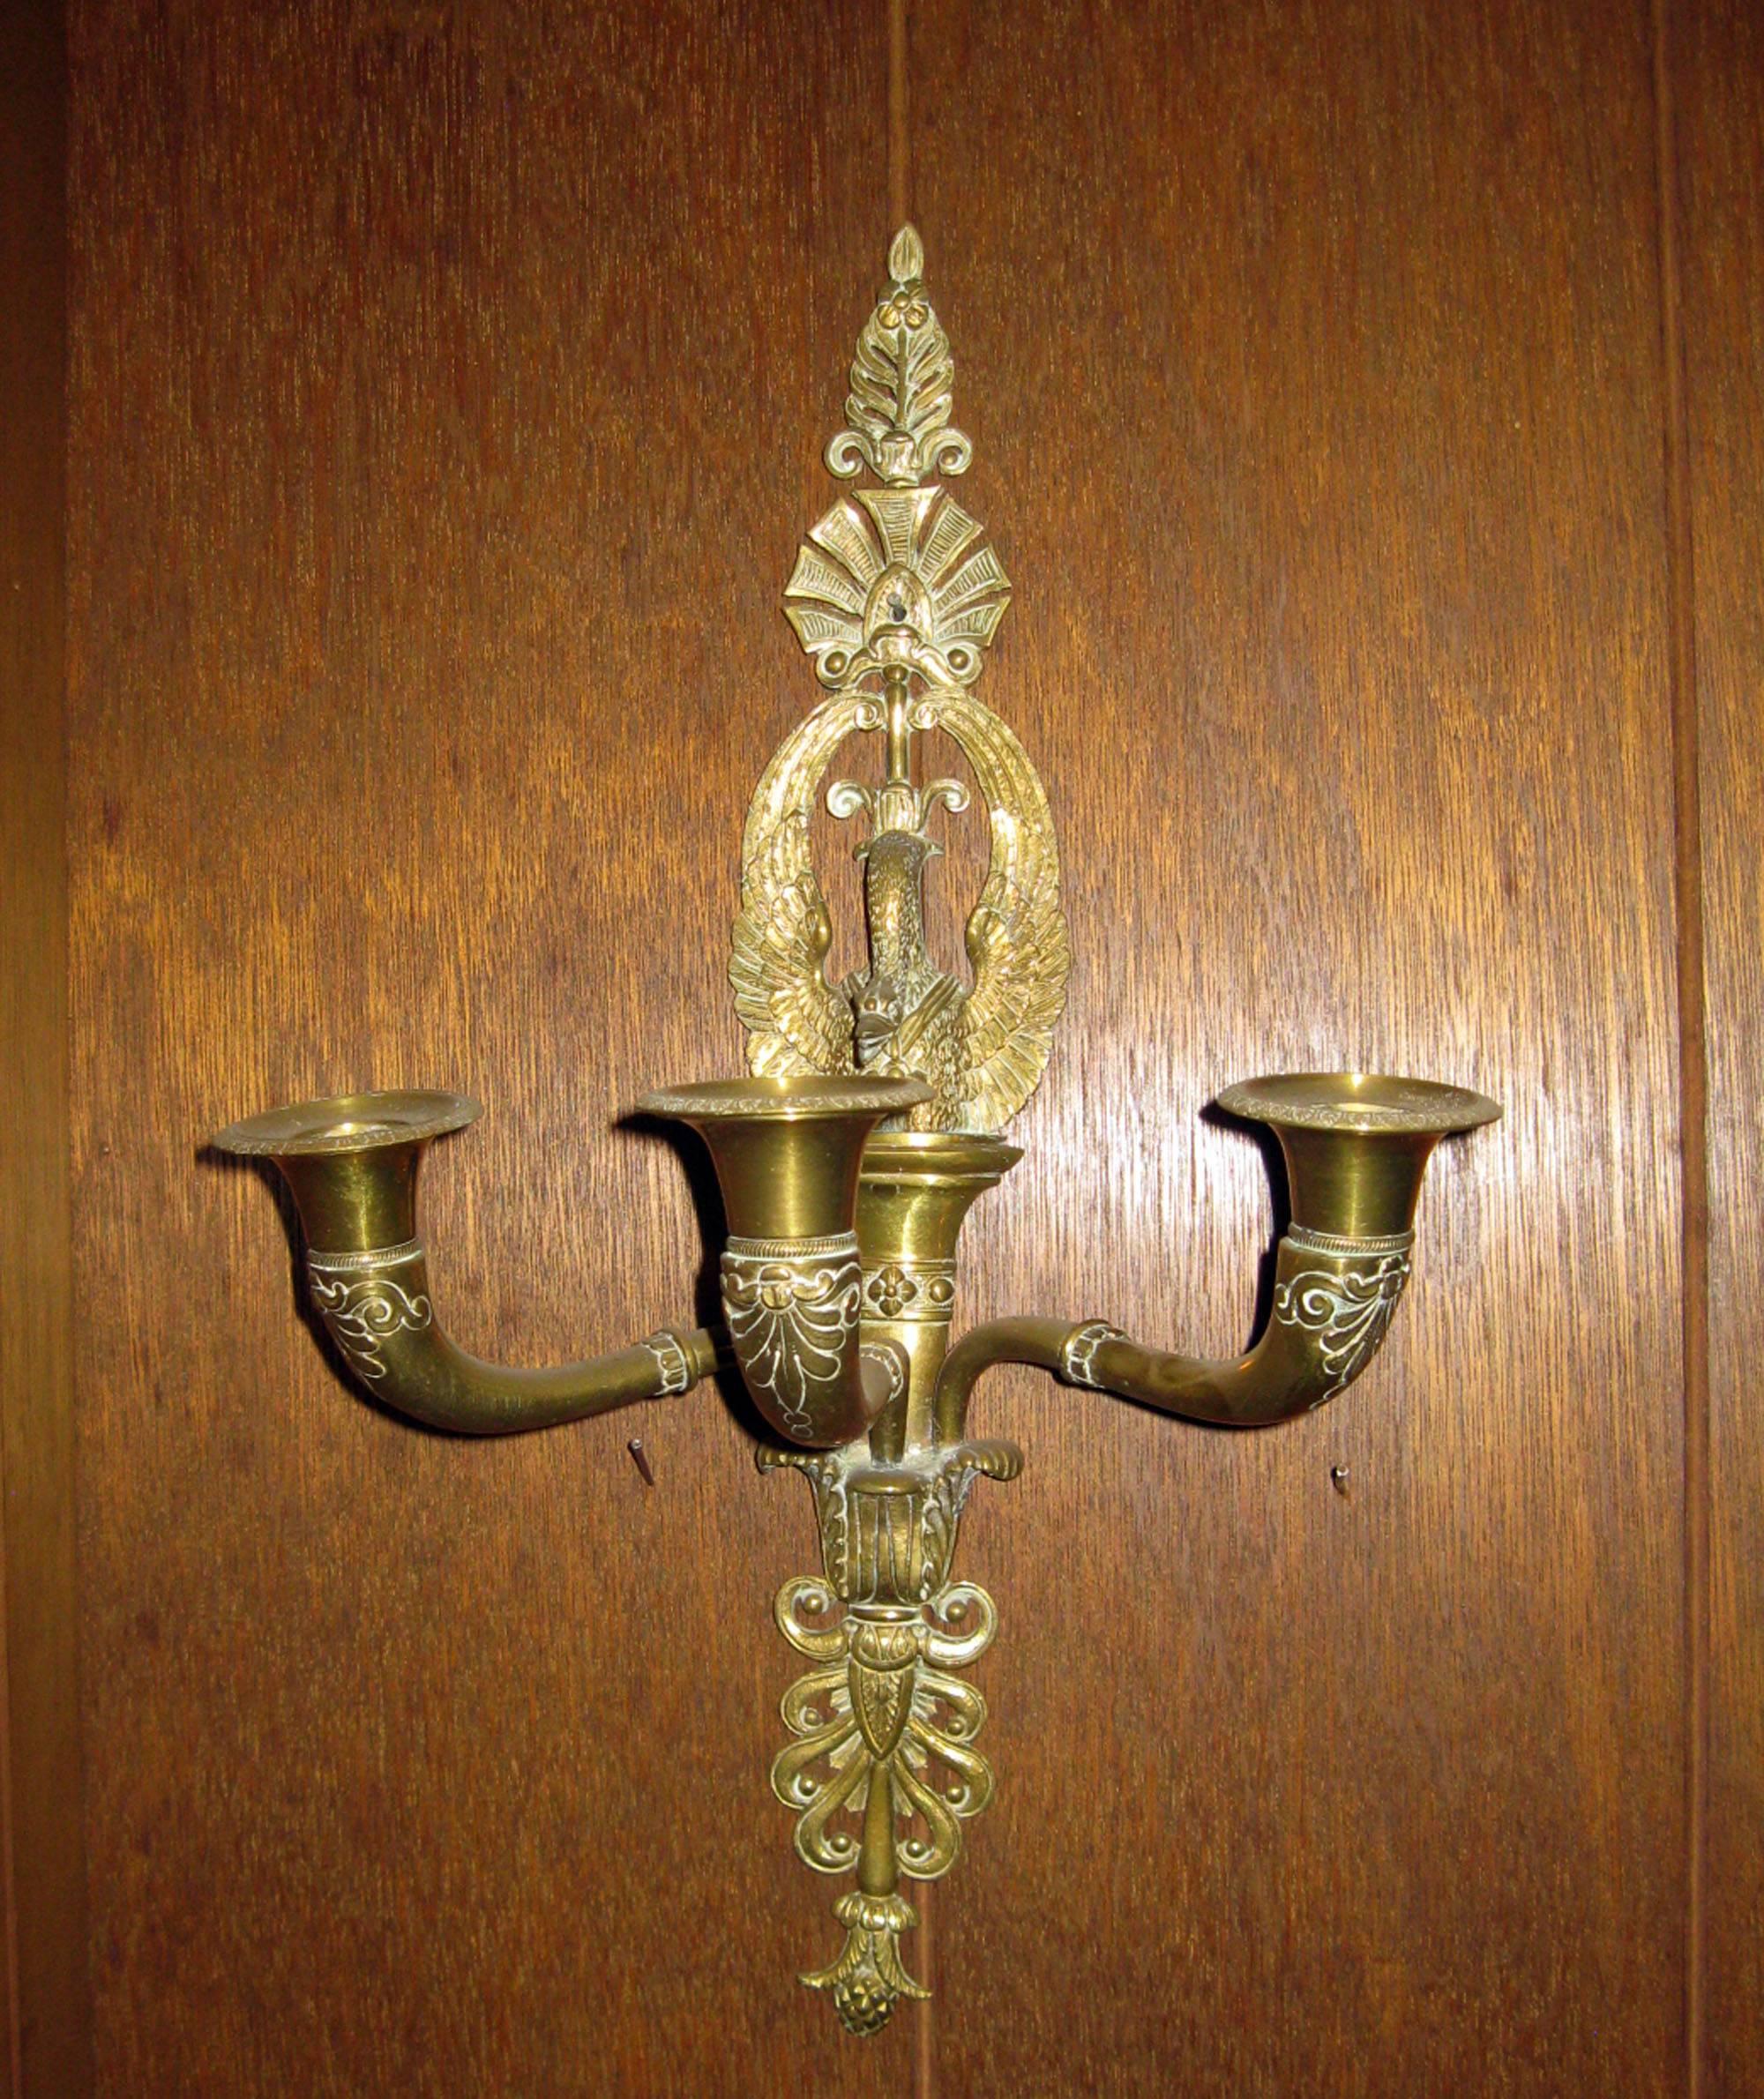 19th century French Empire Swan Motif Sconce Pair For Sale 1